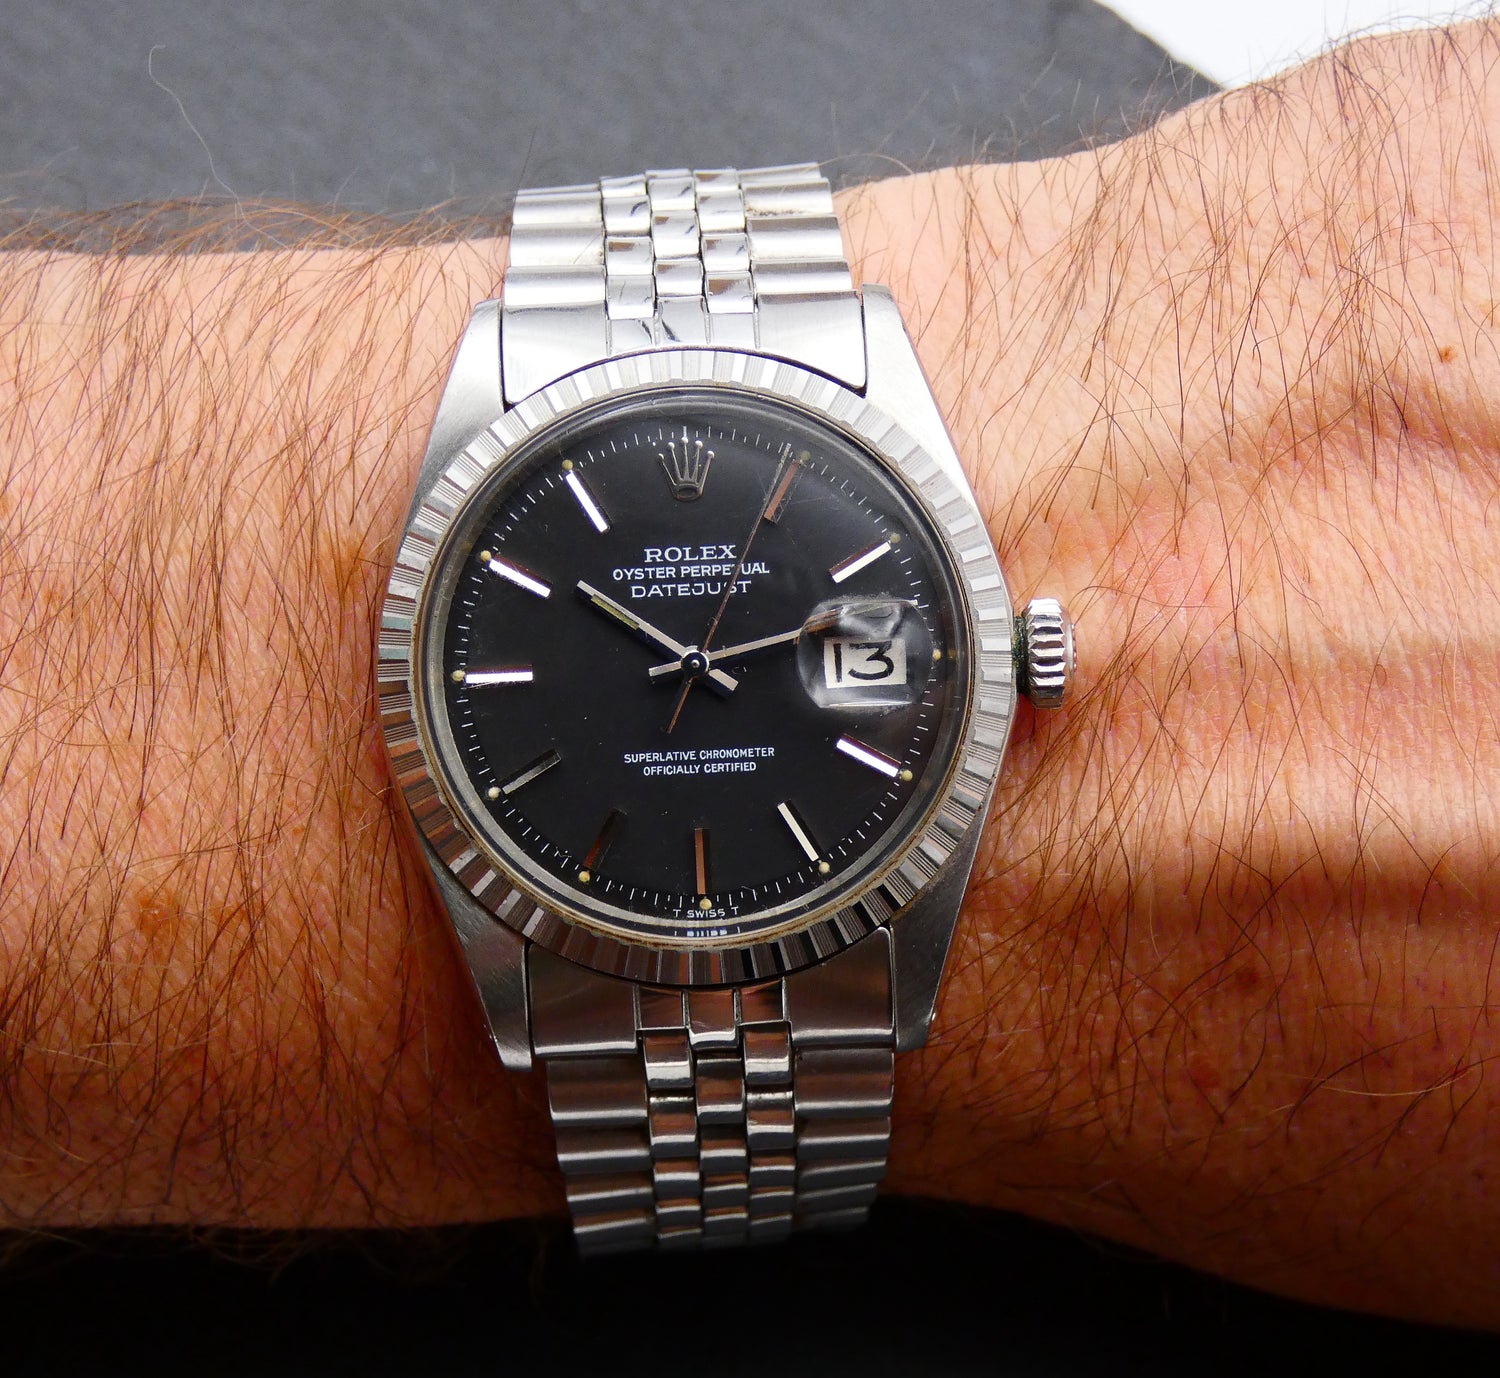 SOLD Rolex Datejust 36 - Grey/Black with papers